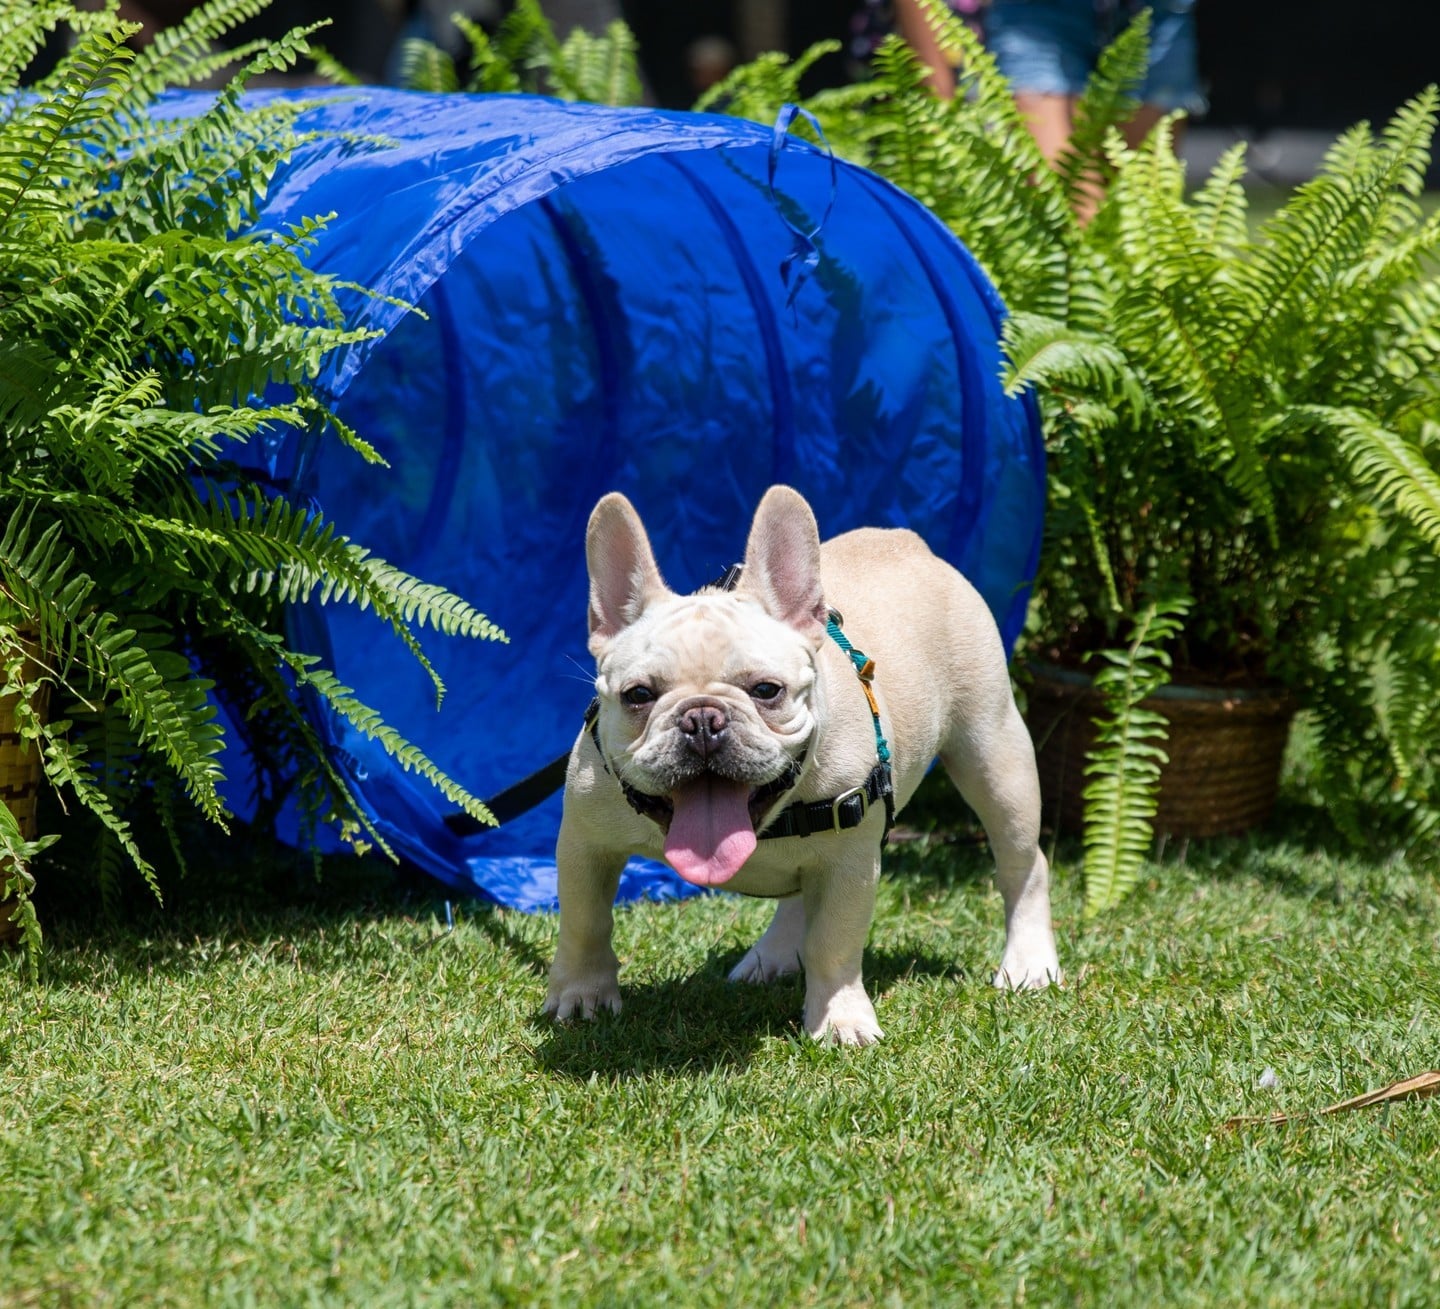 Calling all furry friends! Join us in celebrating National Pet Day on April 15 at Victoria Ward Park. Pose for a photo, race through an obstacle course, ask a question at the @aliianimal information booth, and enjoy treats for both humans and their four-legged friends. Learn more at the link in our bio.